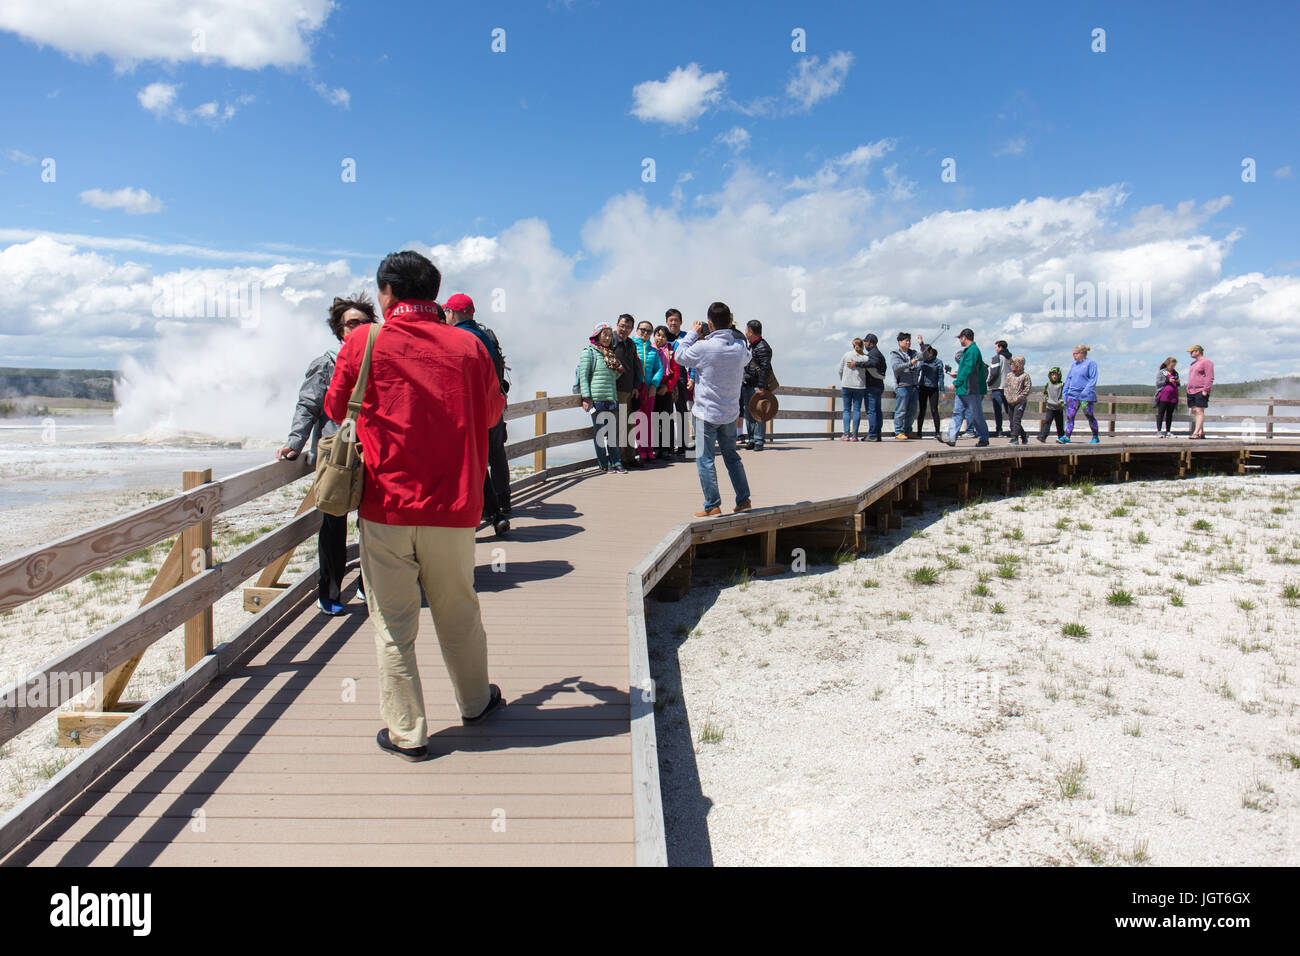 People are taking pictures and making selfies on the boardwalk of Fountain Paintpot Trail near Spasm Geyser in Lower Geyser Basin in Yellowstone Natio Stock Photo